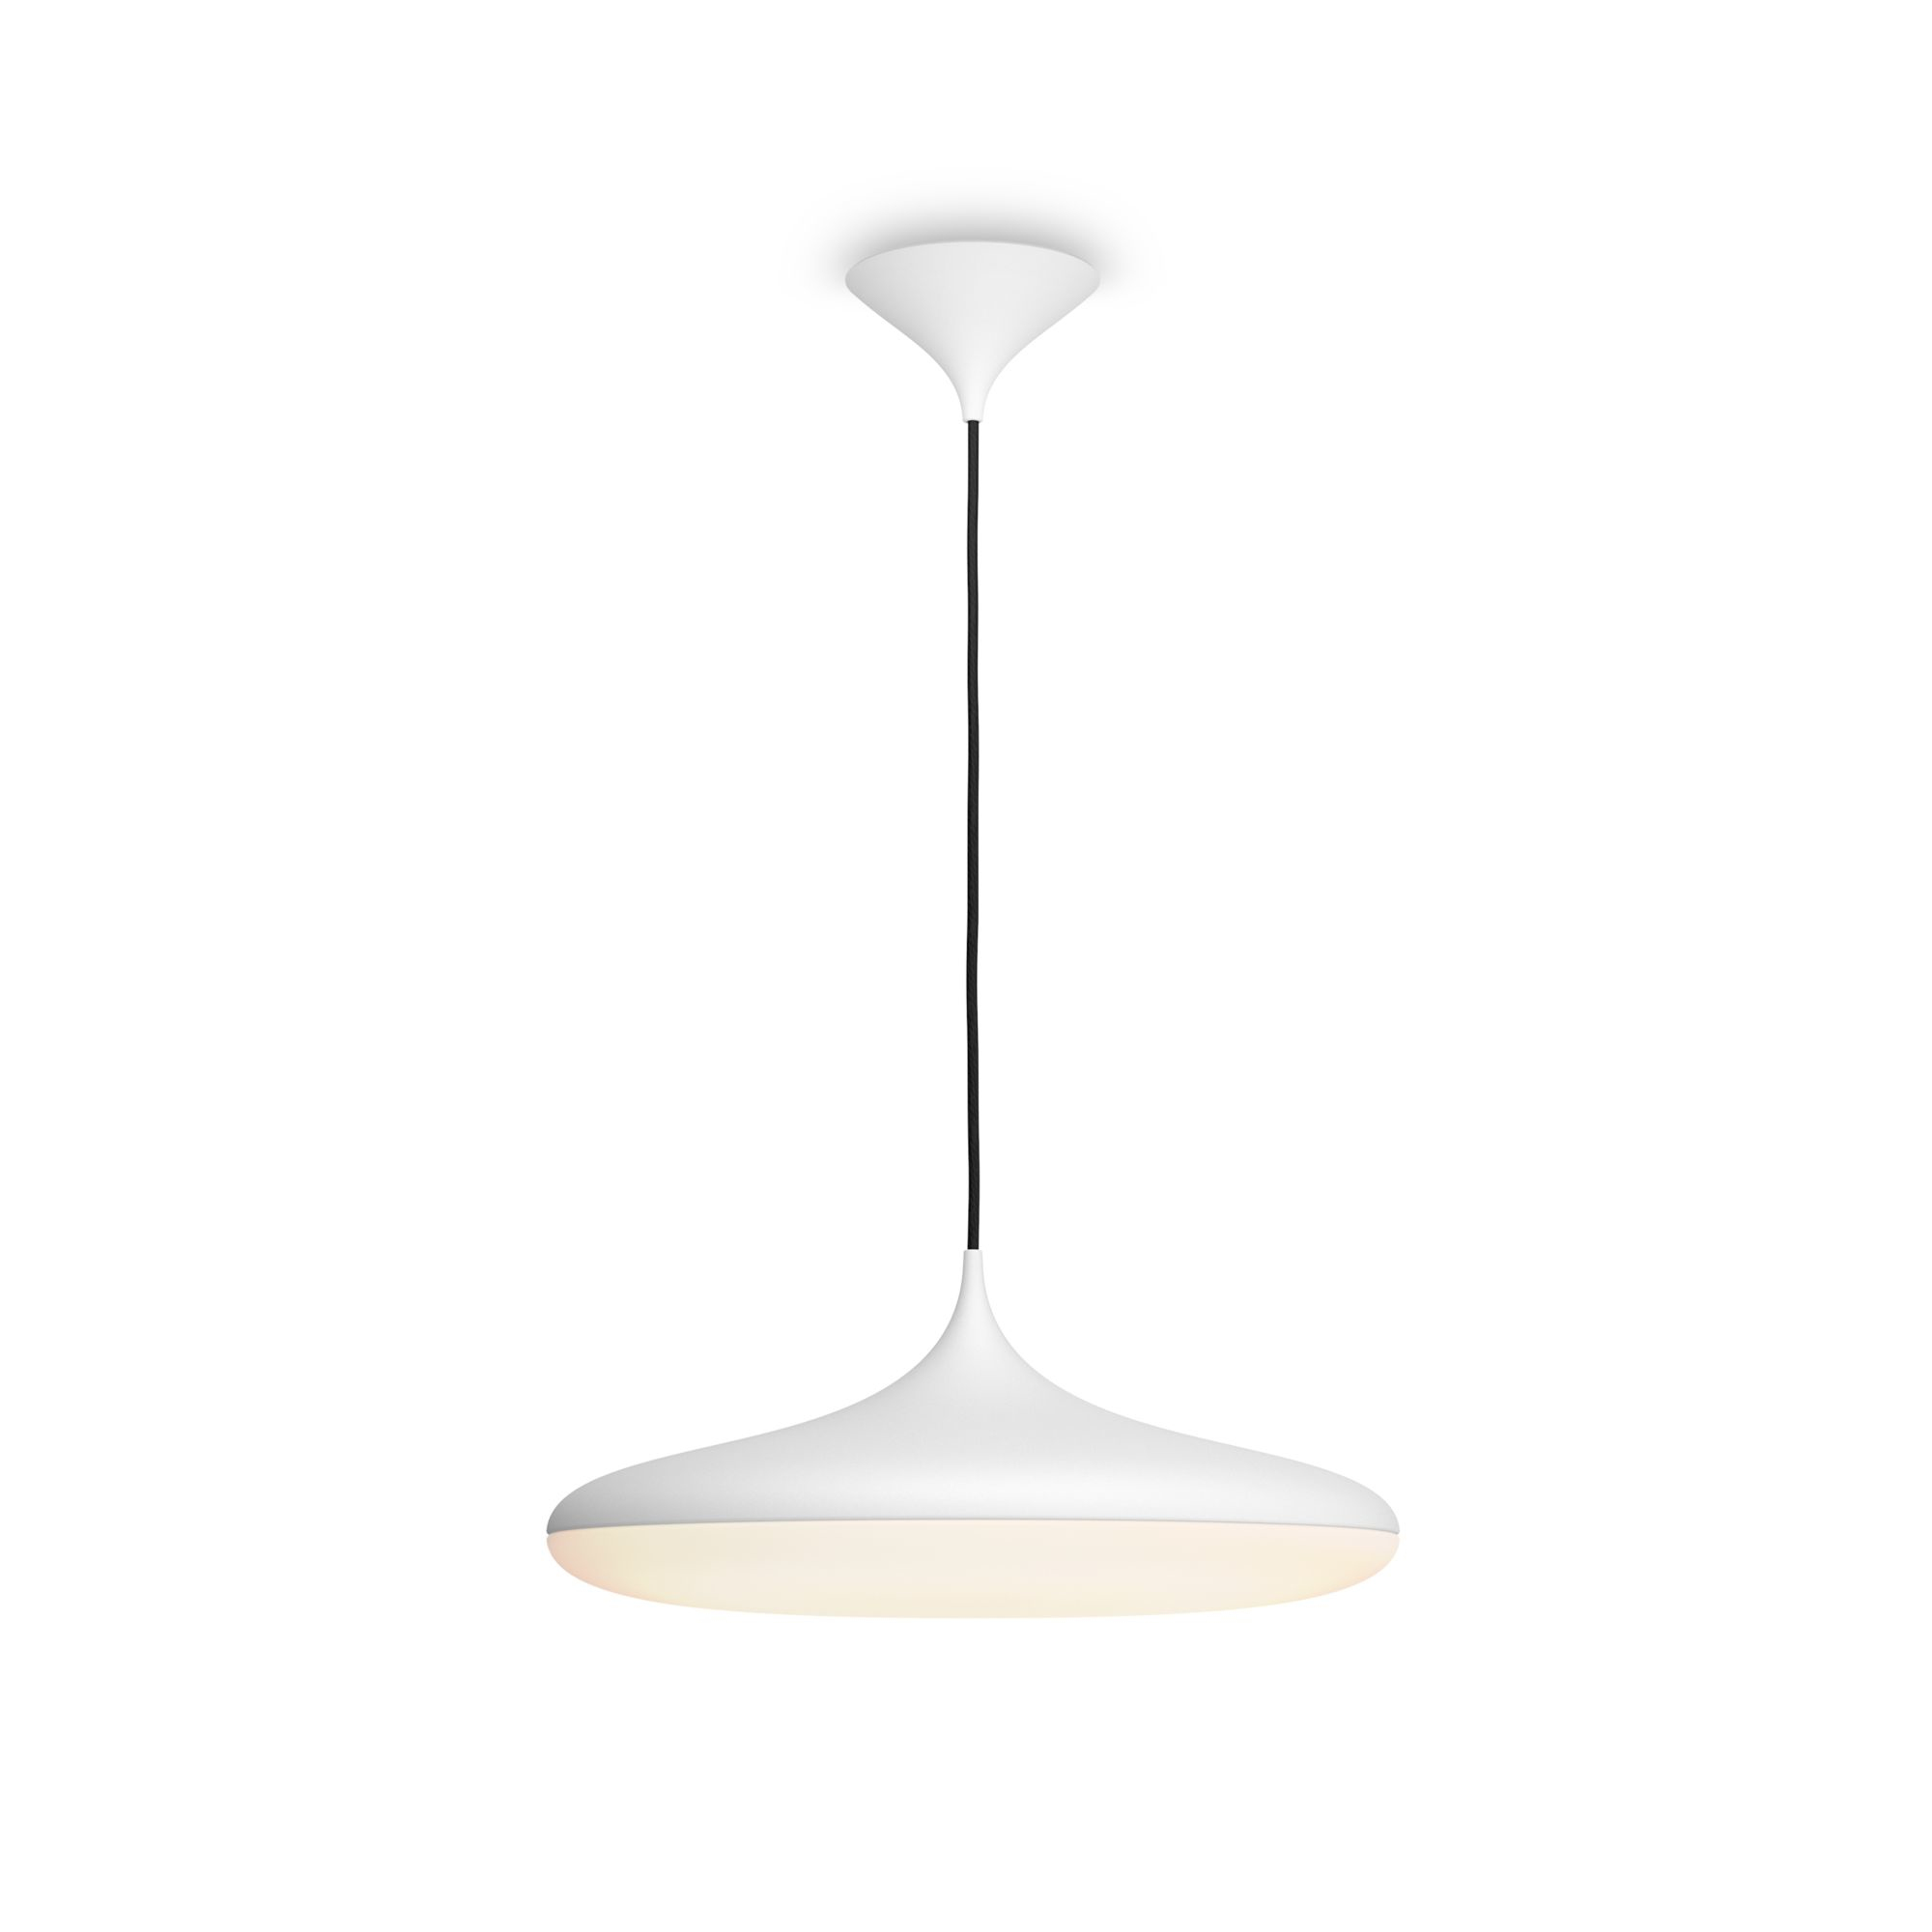 Philips by Signify Cher hanglamp